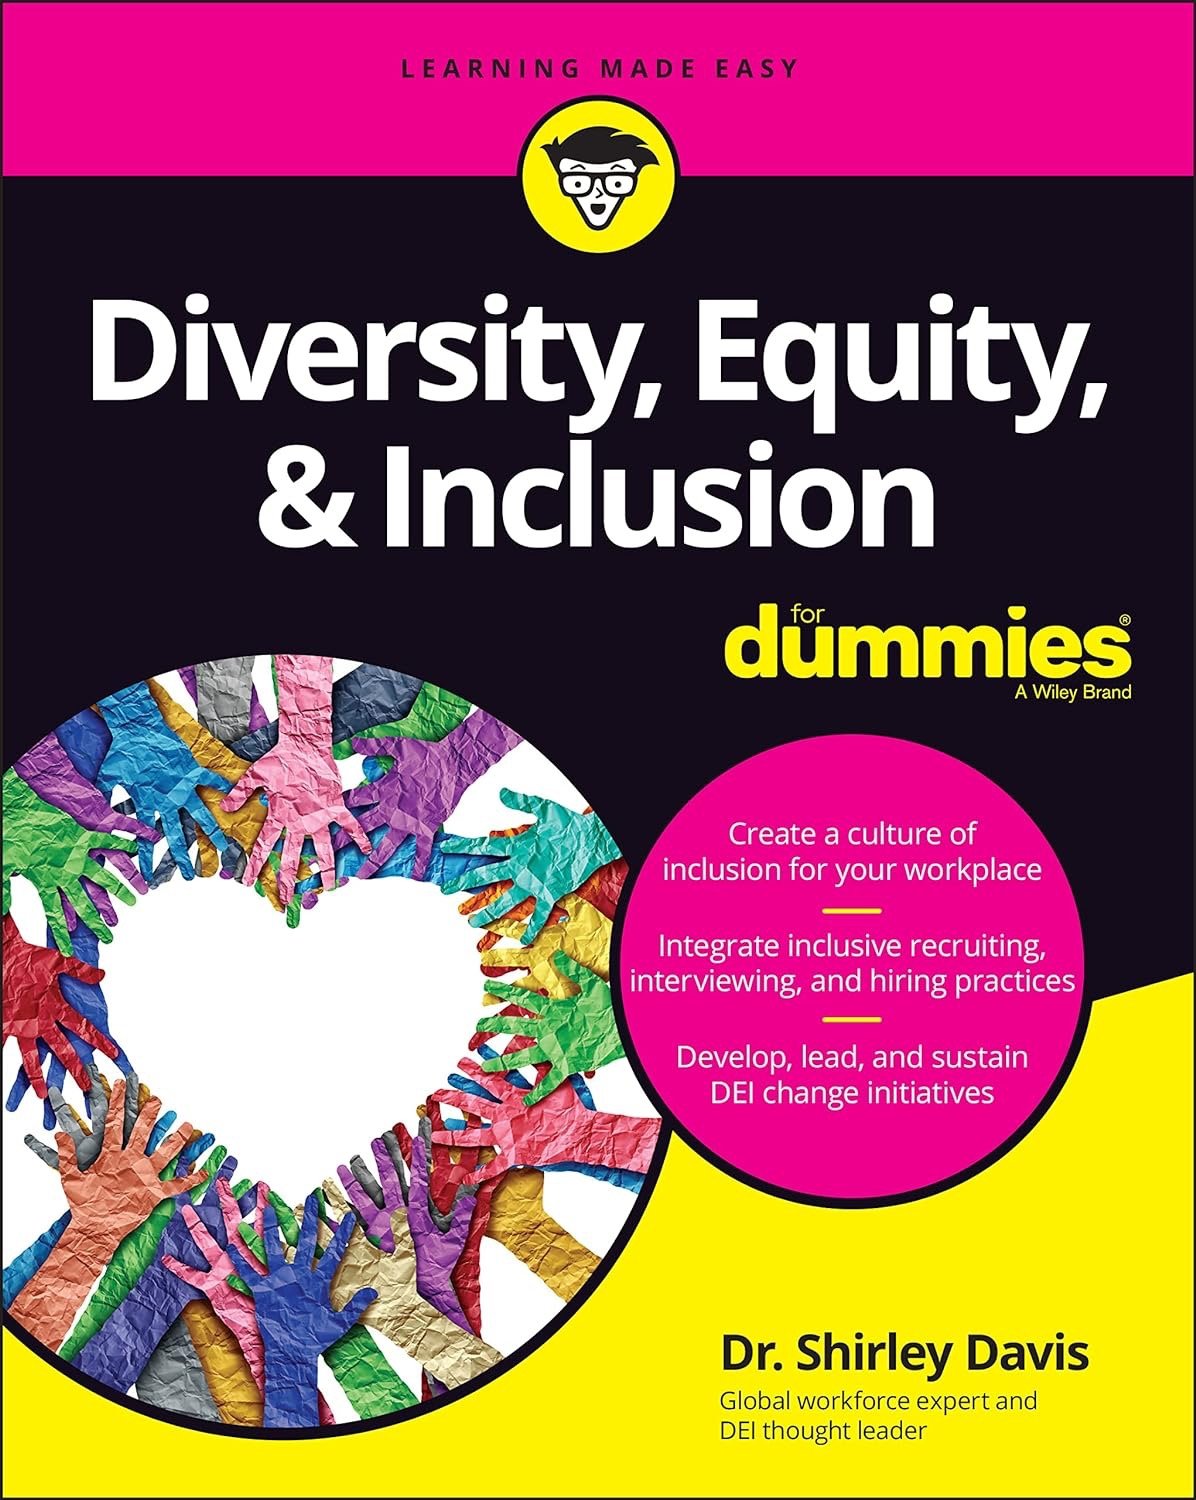 Diversity, Equity & Inclusion For Dummies: A Guide to Building an Inclusive Workplace